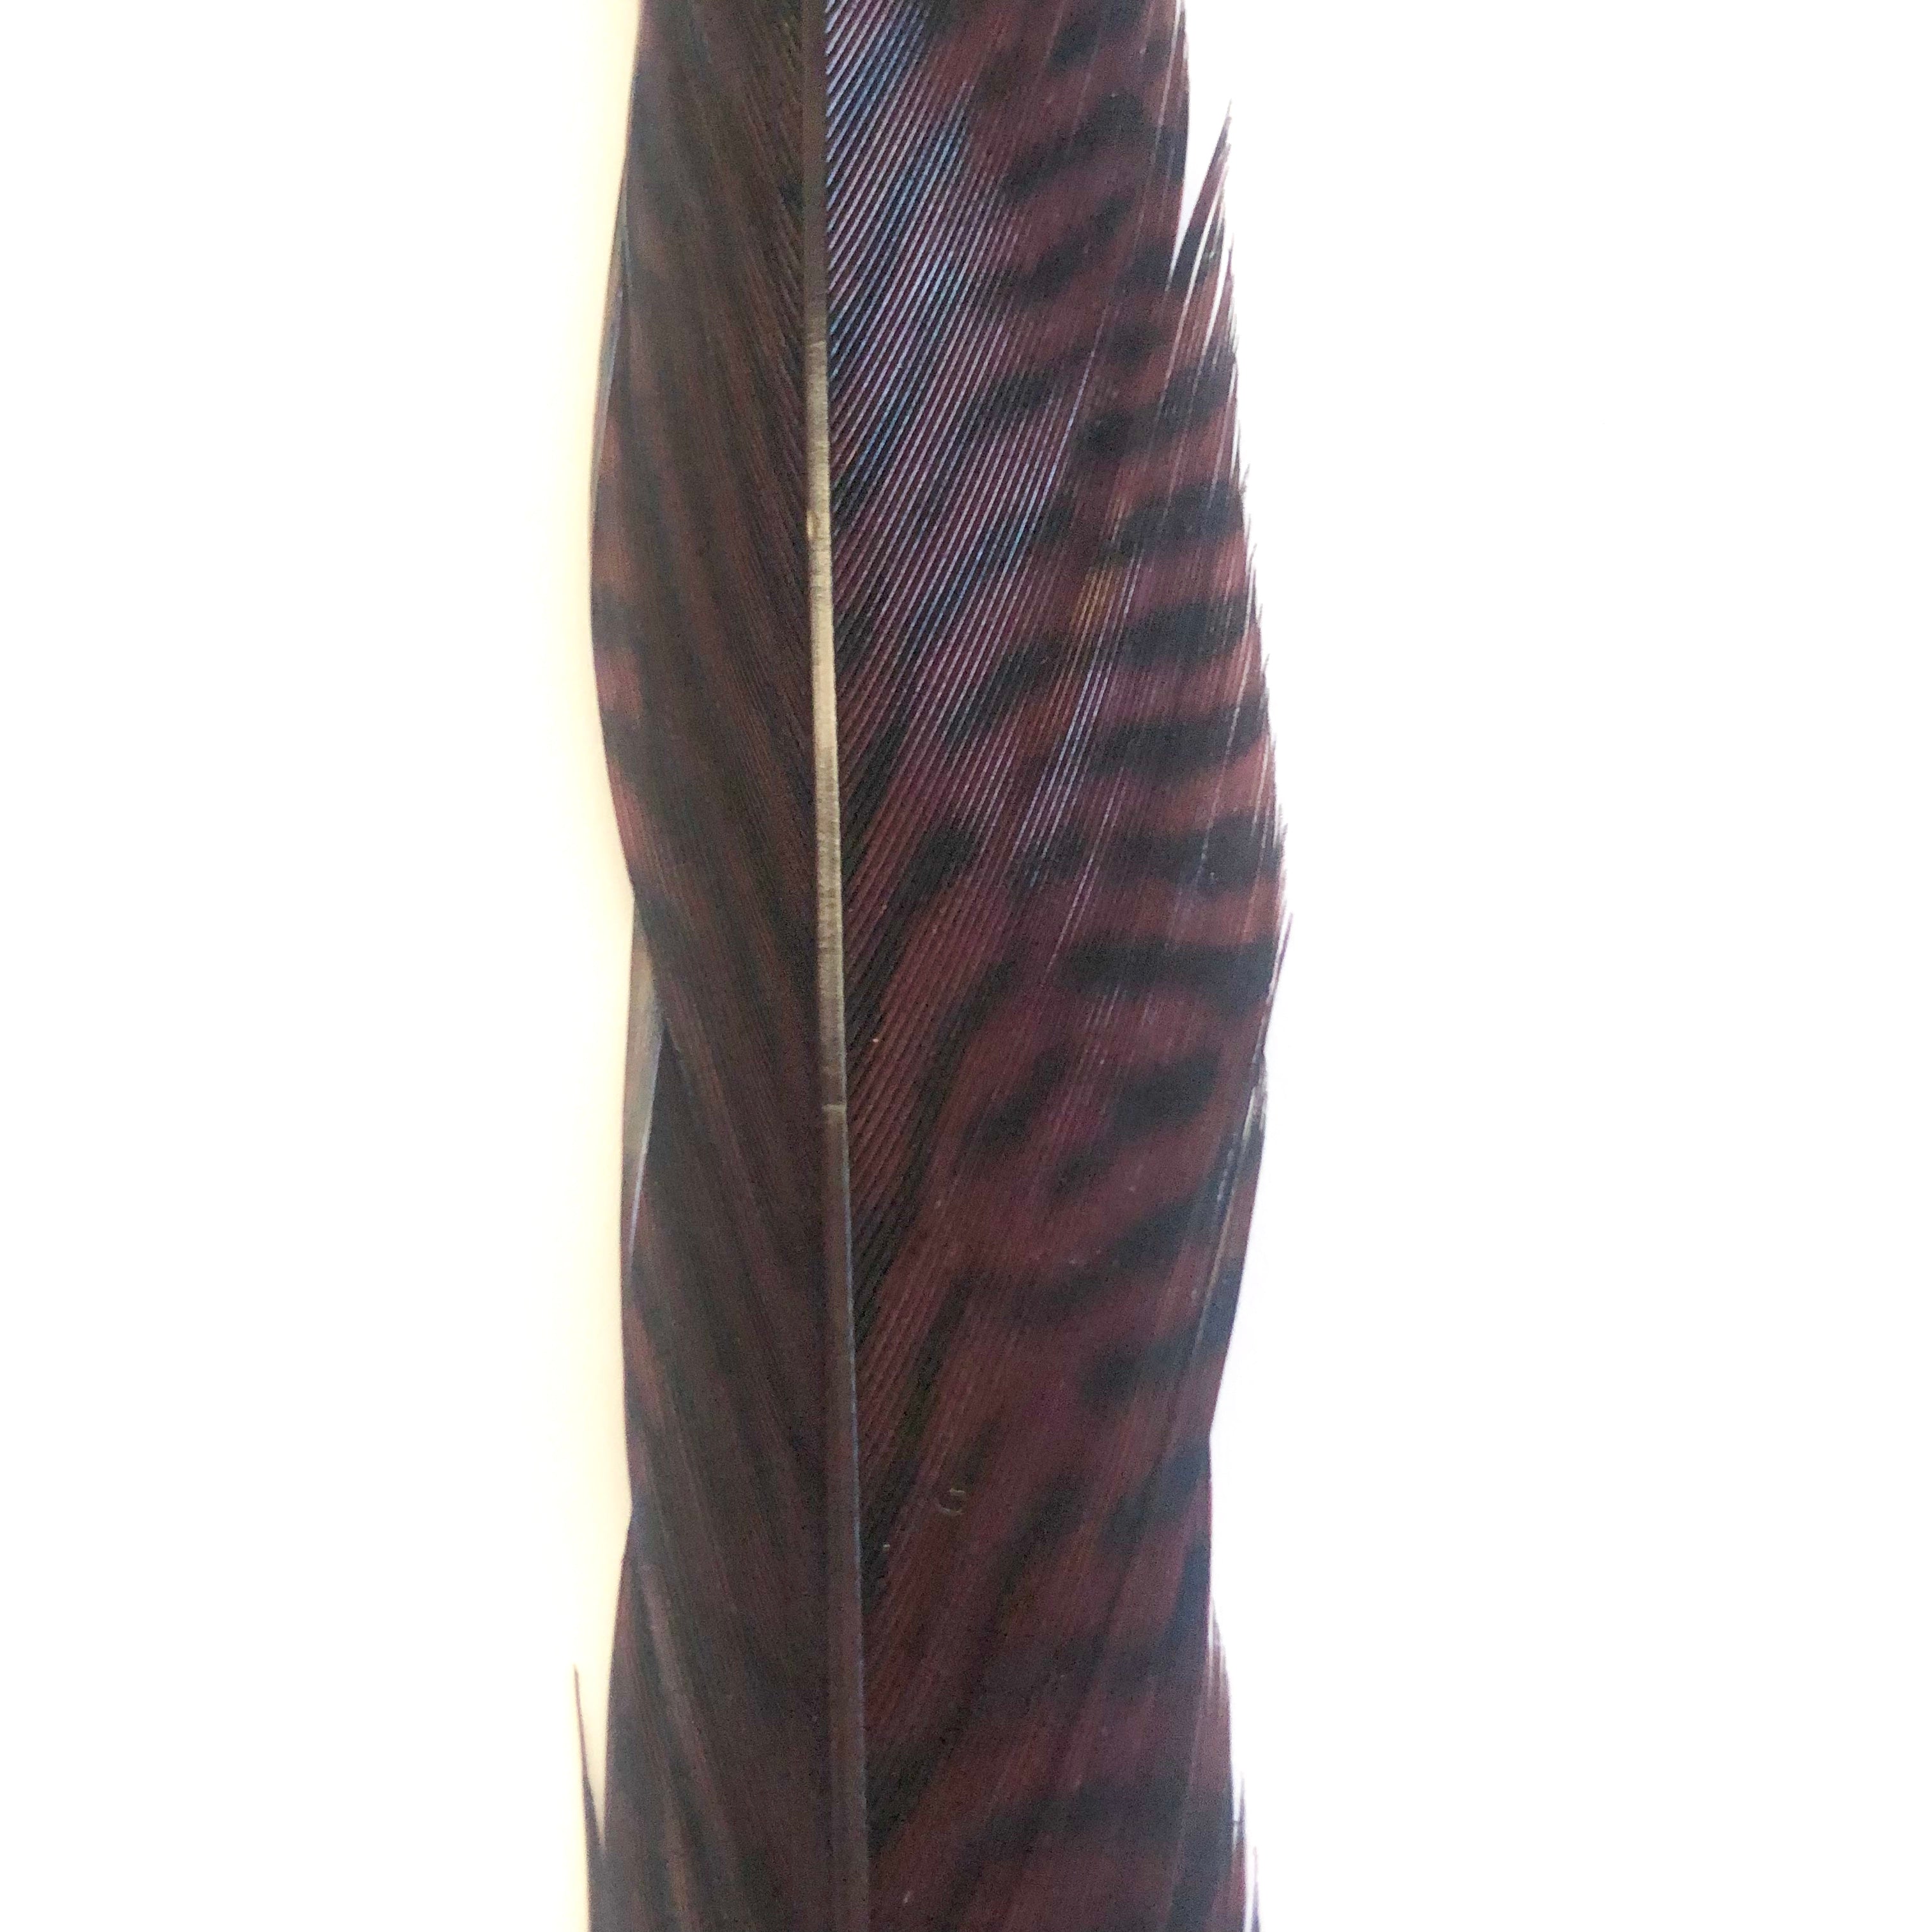 10" to 20" Golden Pheasant Side Tail Feather - Chocolate Brown ((SECONDS))